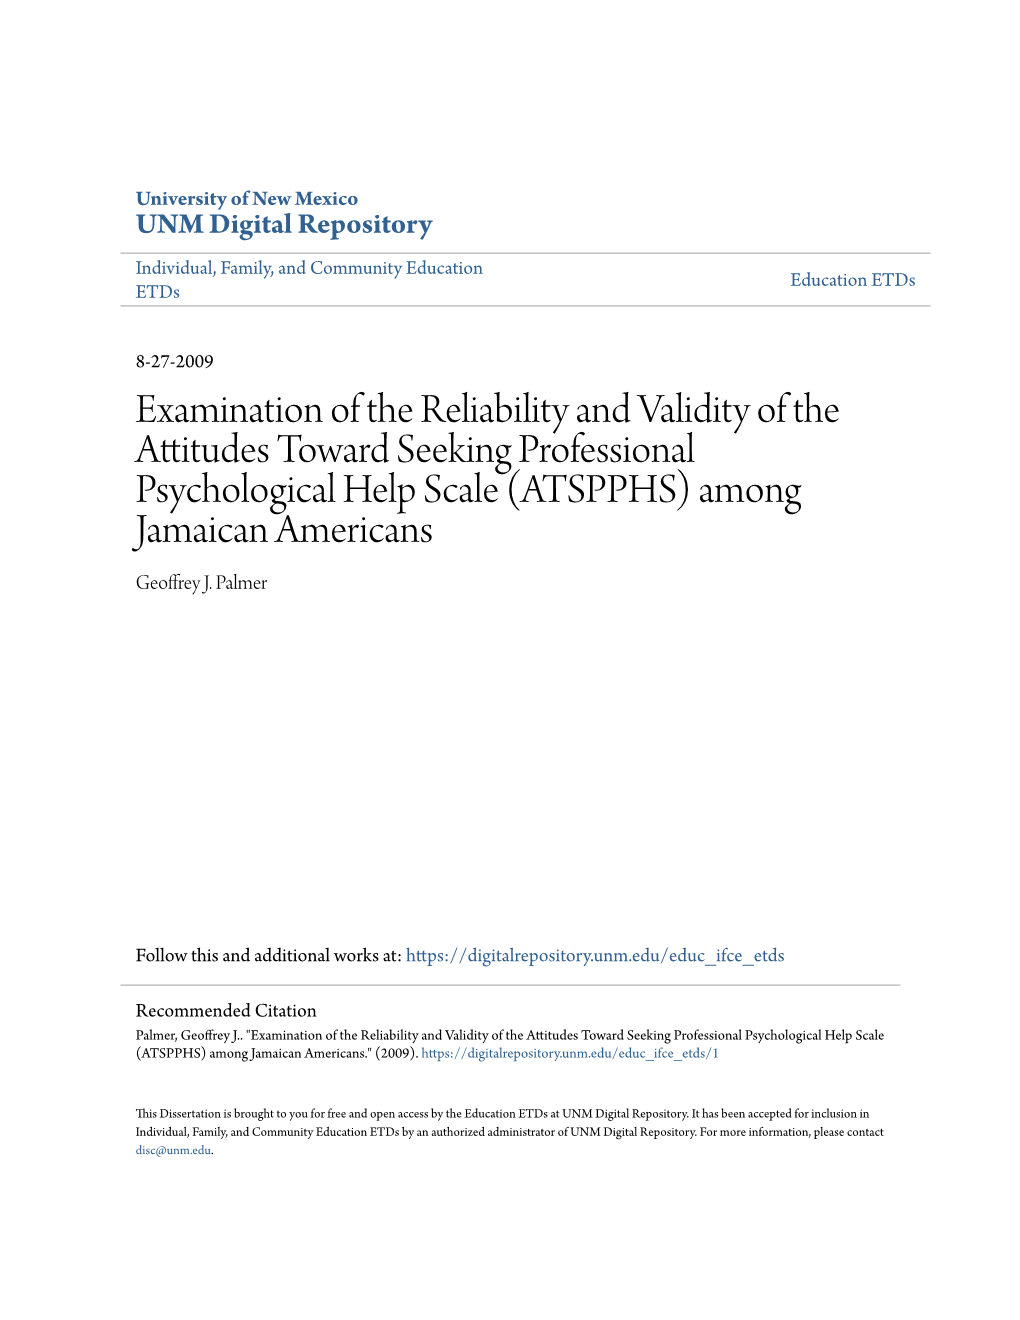 Validity of the Attitudes Toward Seeking Psychological Professional Help Scale